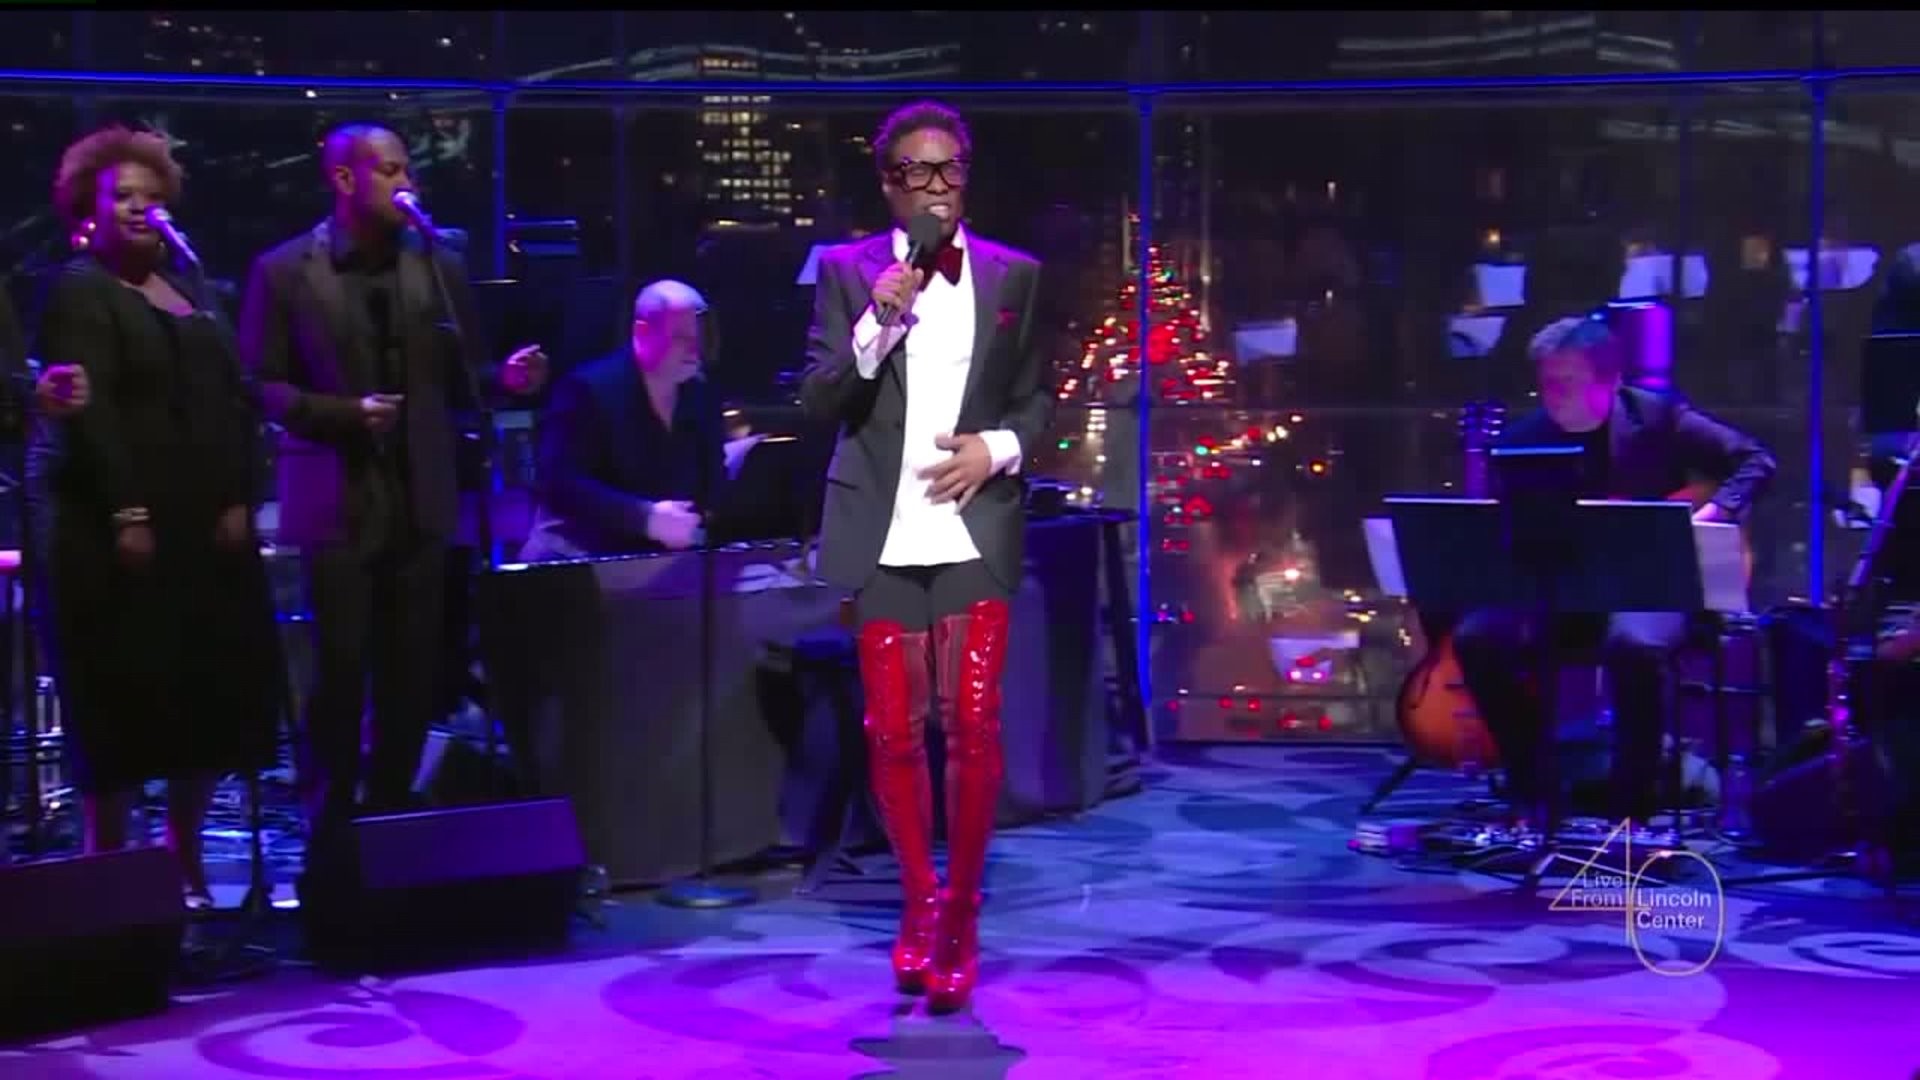 Pennsylvania`s own Billy Porter is vising Lancaster to promote his new album, and to benefit Prima Theatre